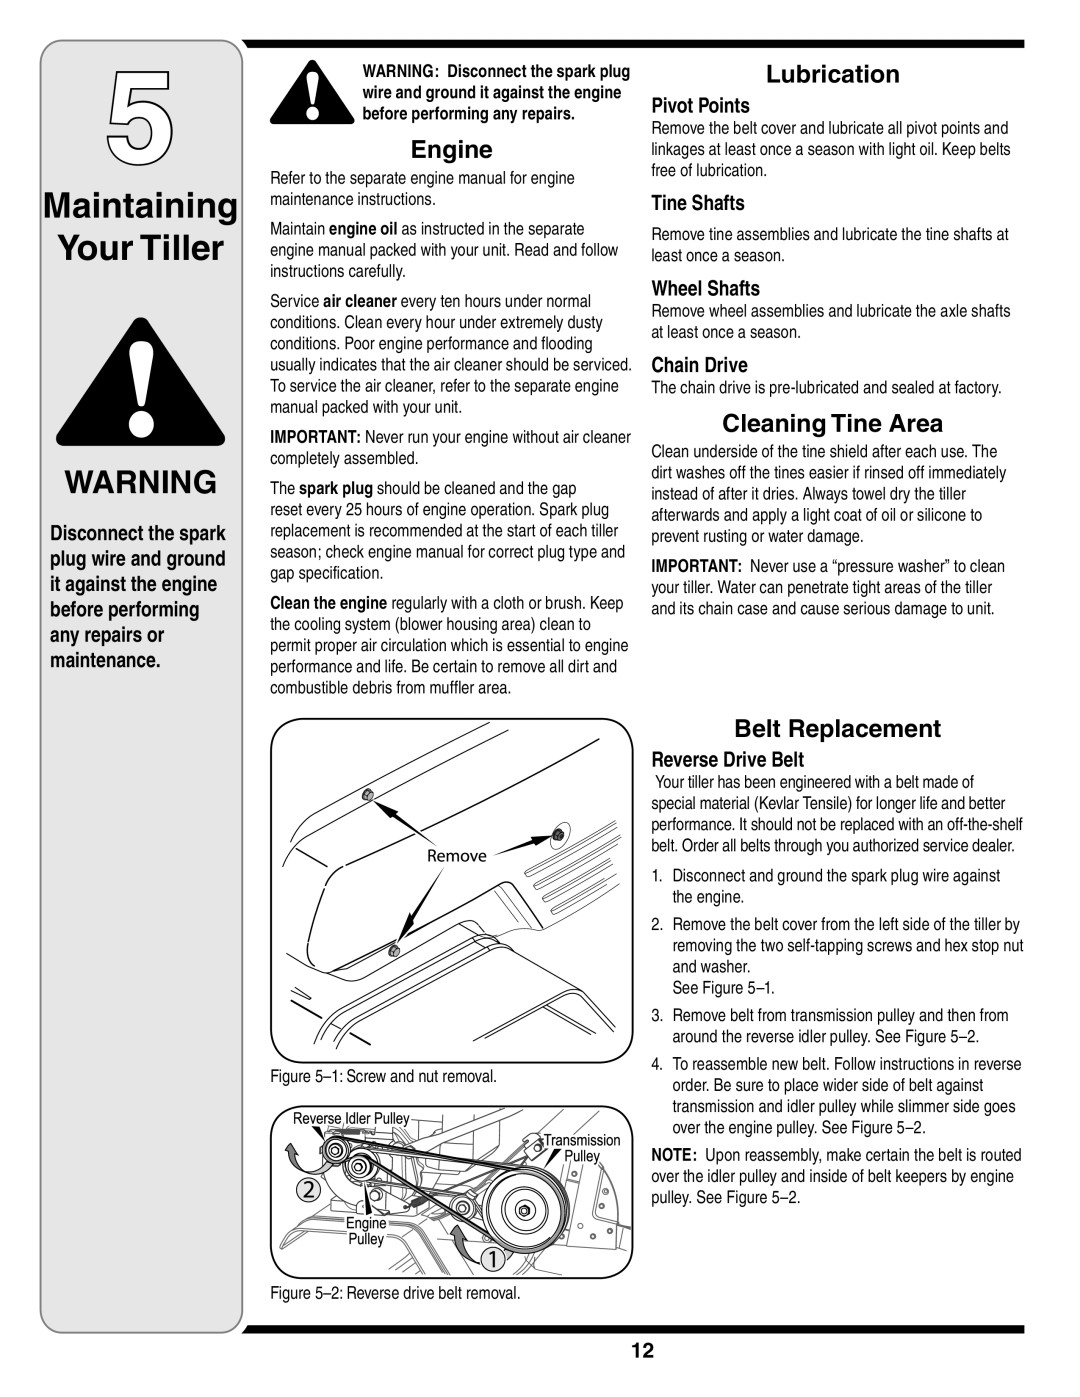 Cub Cadet Series 390 warranty Maintaining Your Tiller, Engine, Lubrication, Cleaning Tine Area, Belt Replacement 